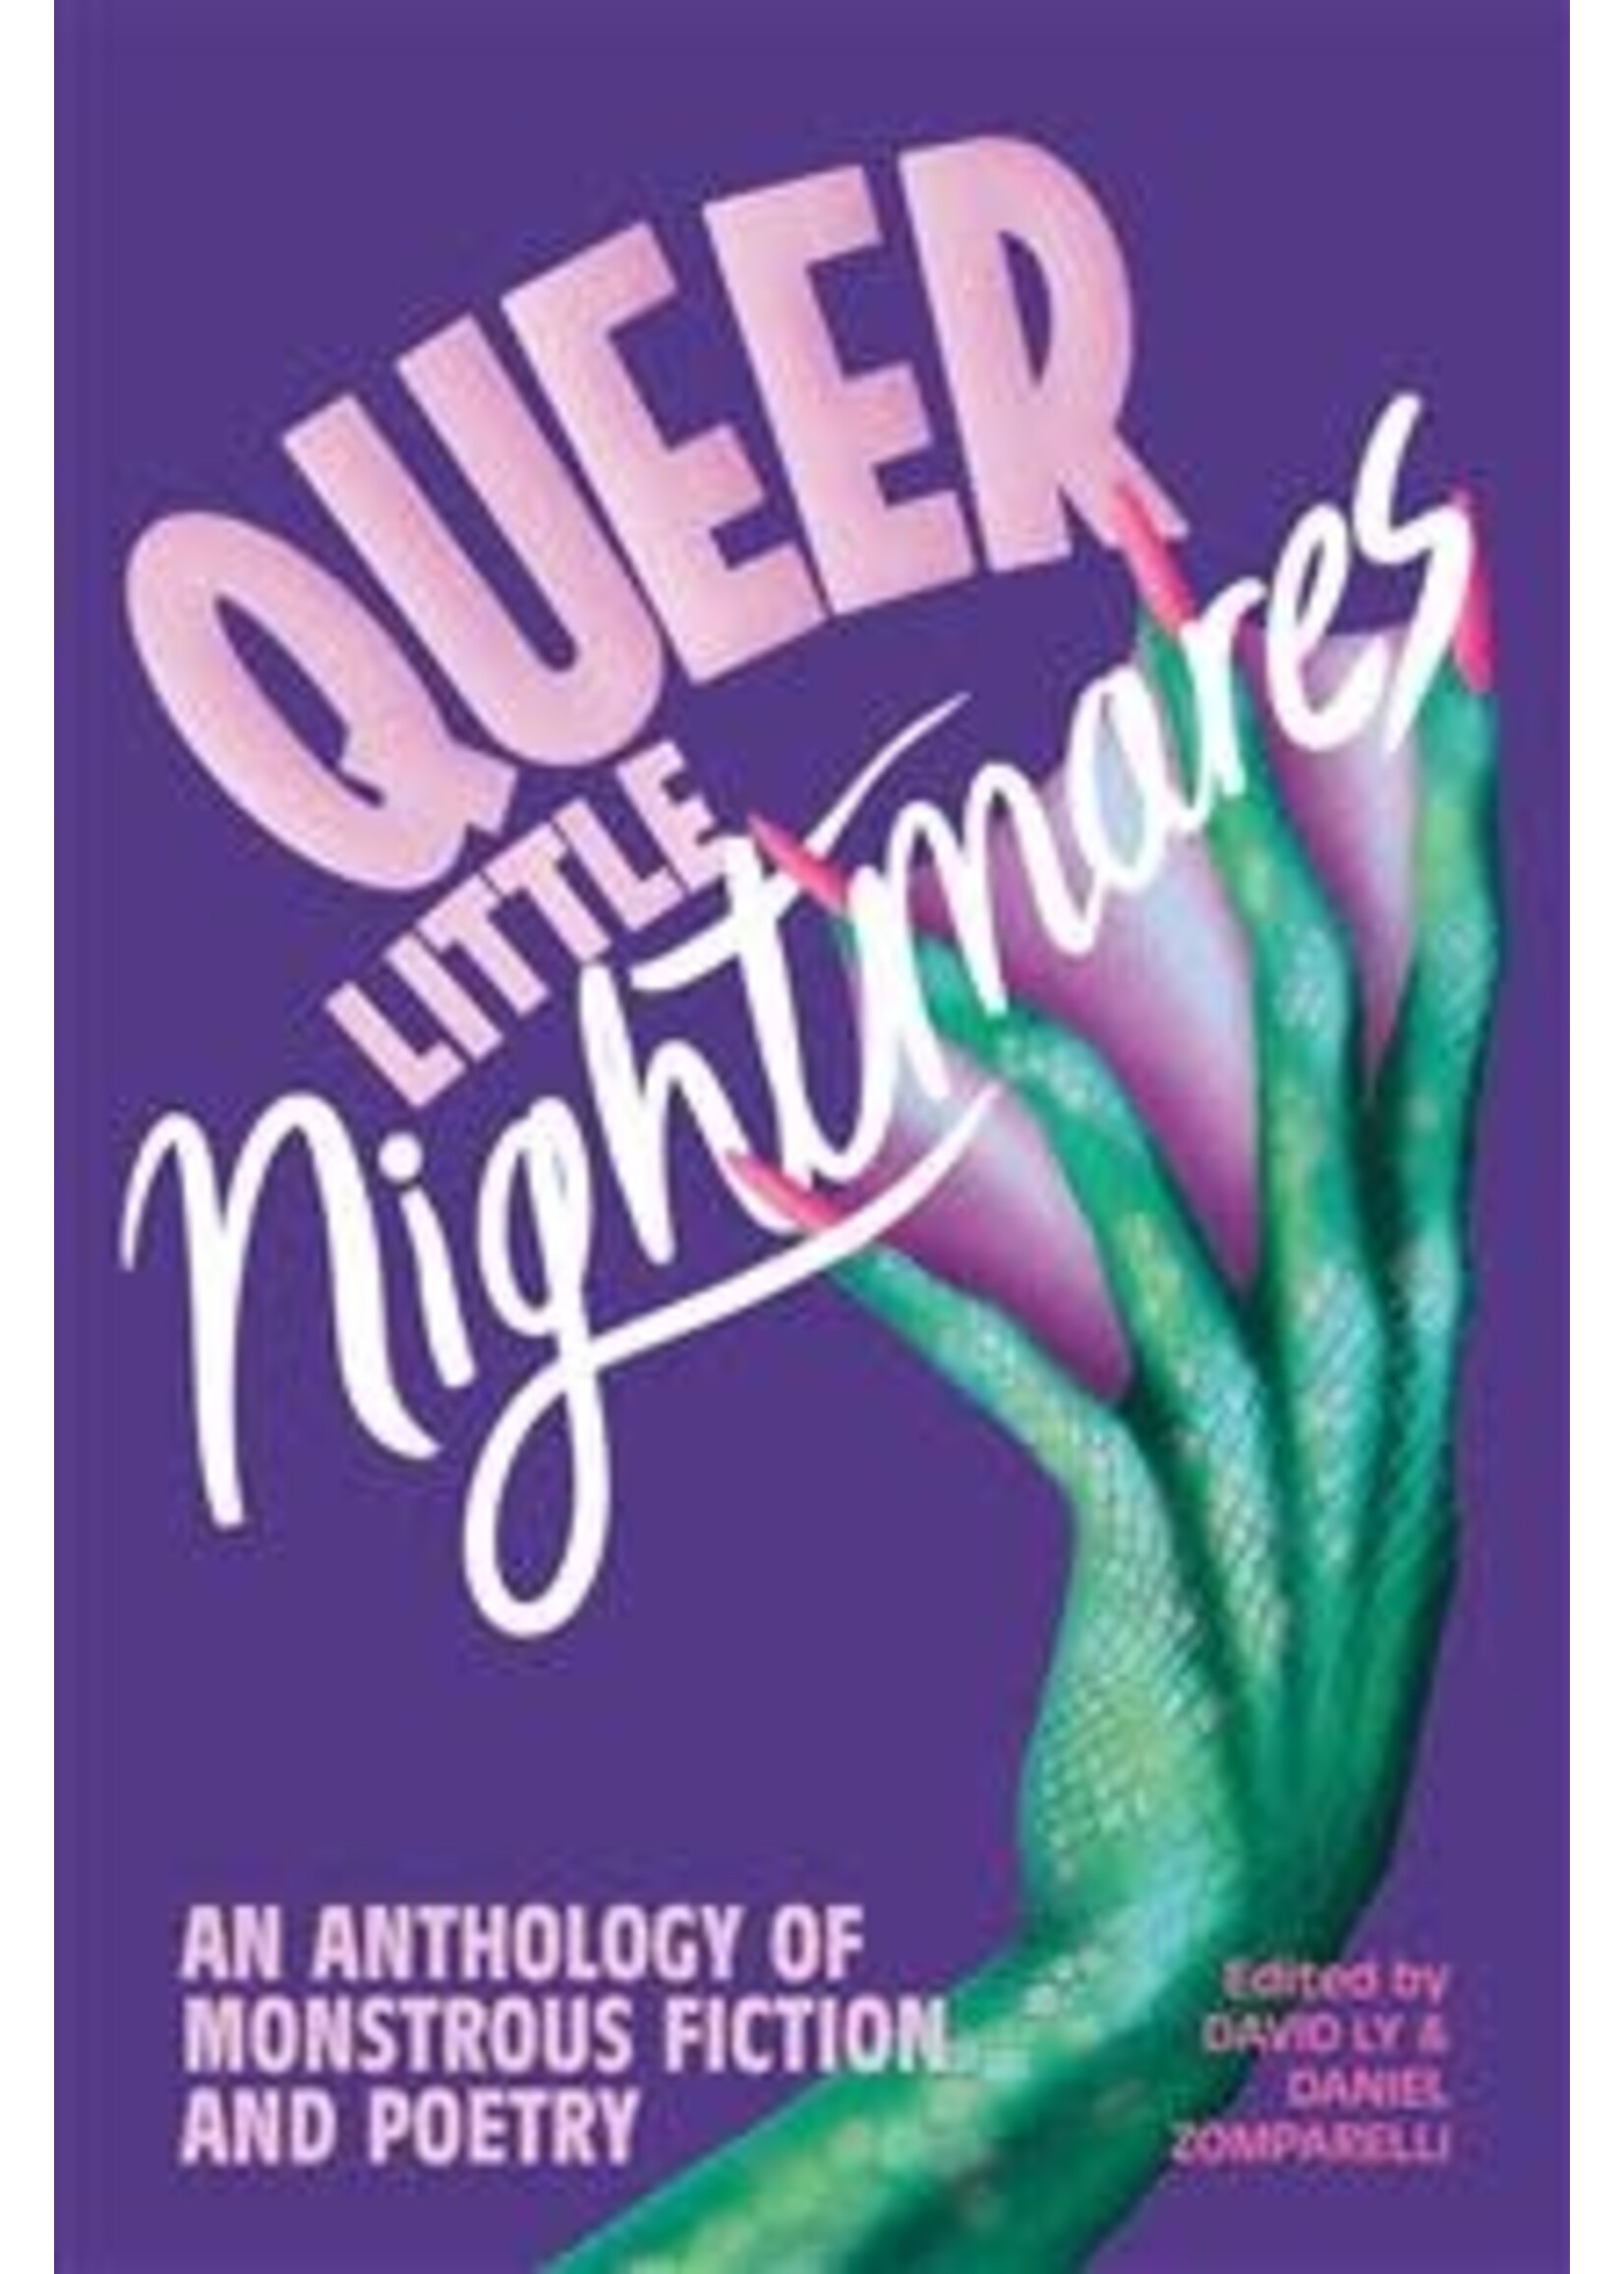 Queer Little Nightmares: An Anthology of Monstrous Fiction and Poetry by David Ly, Daniel Zomparelli